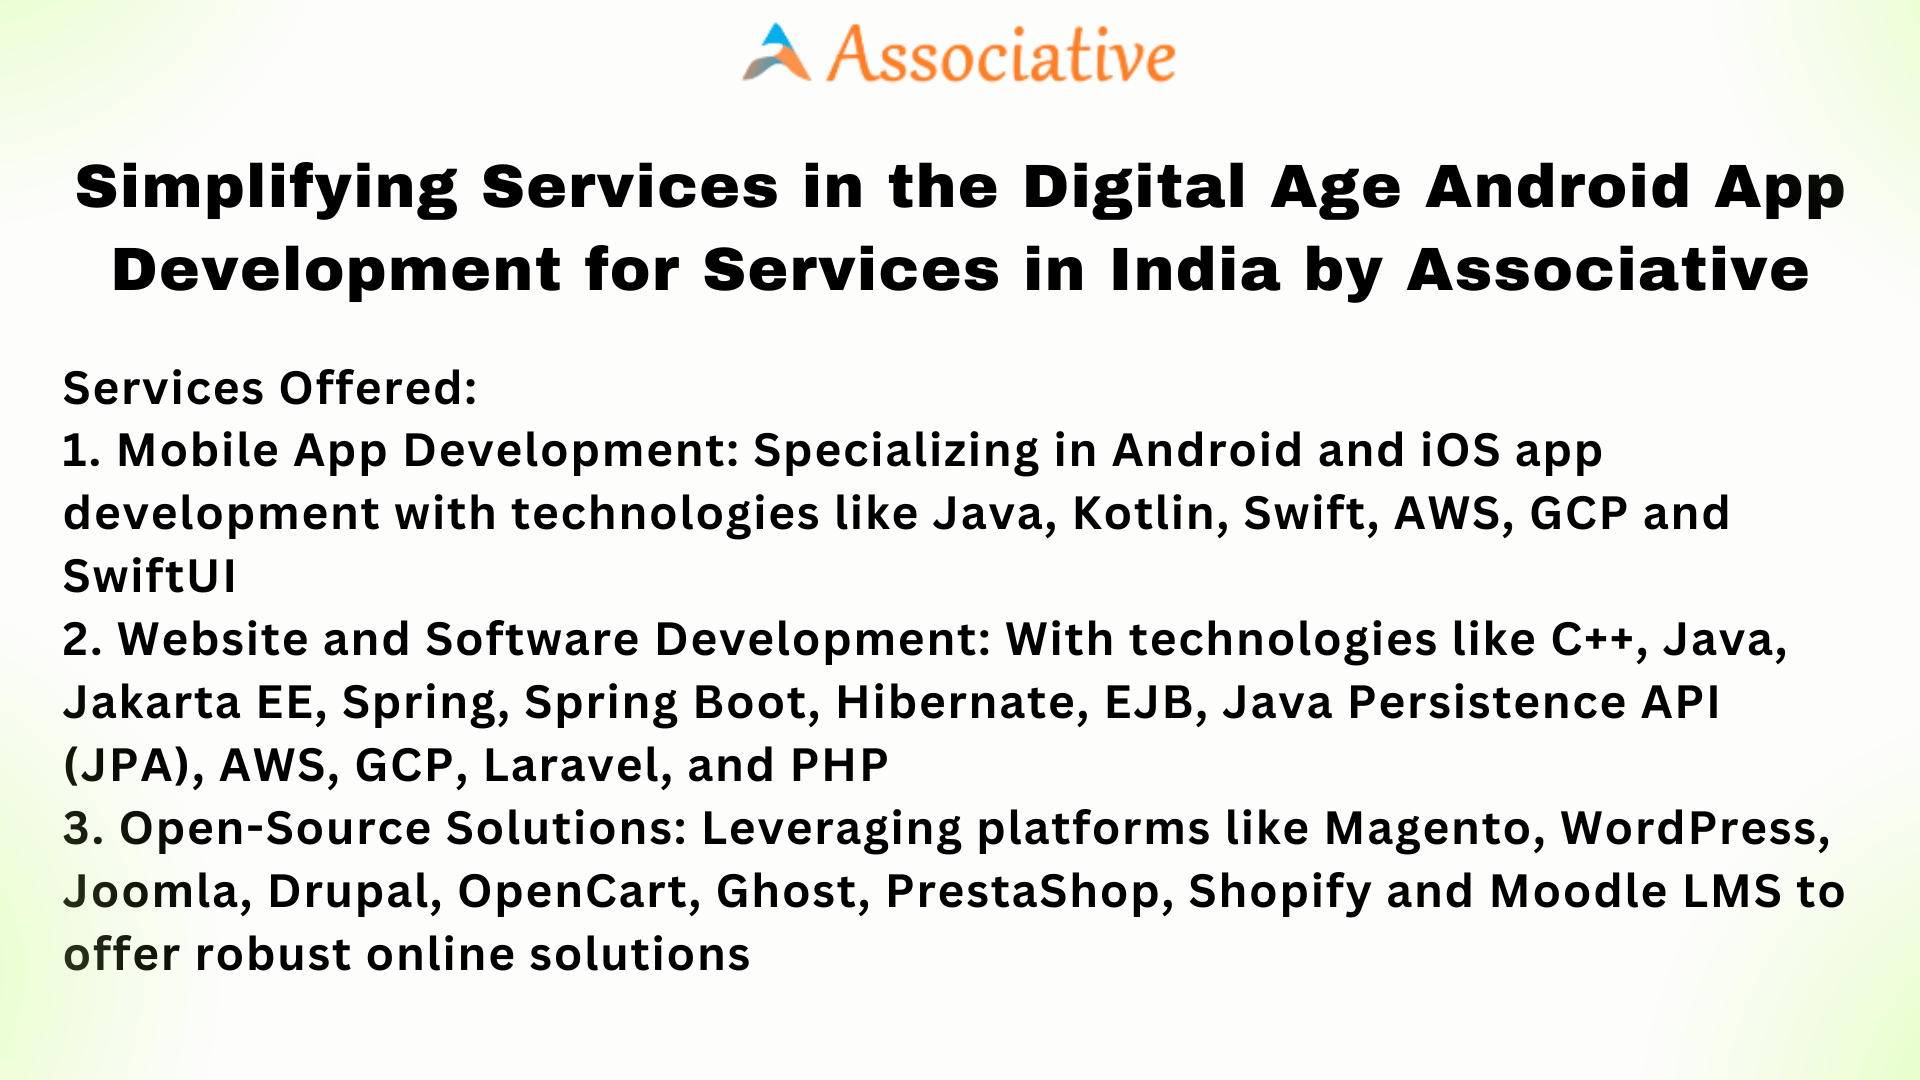 Simplifying Services in the Digital Age Android App Development for Services in India by Associative